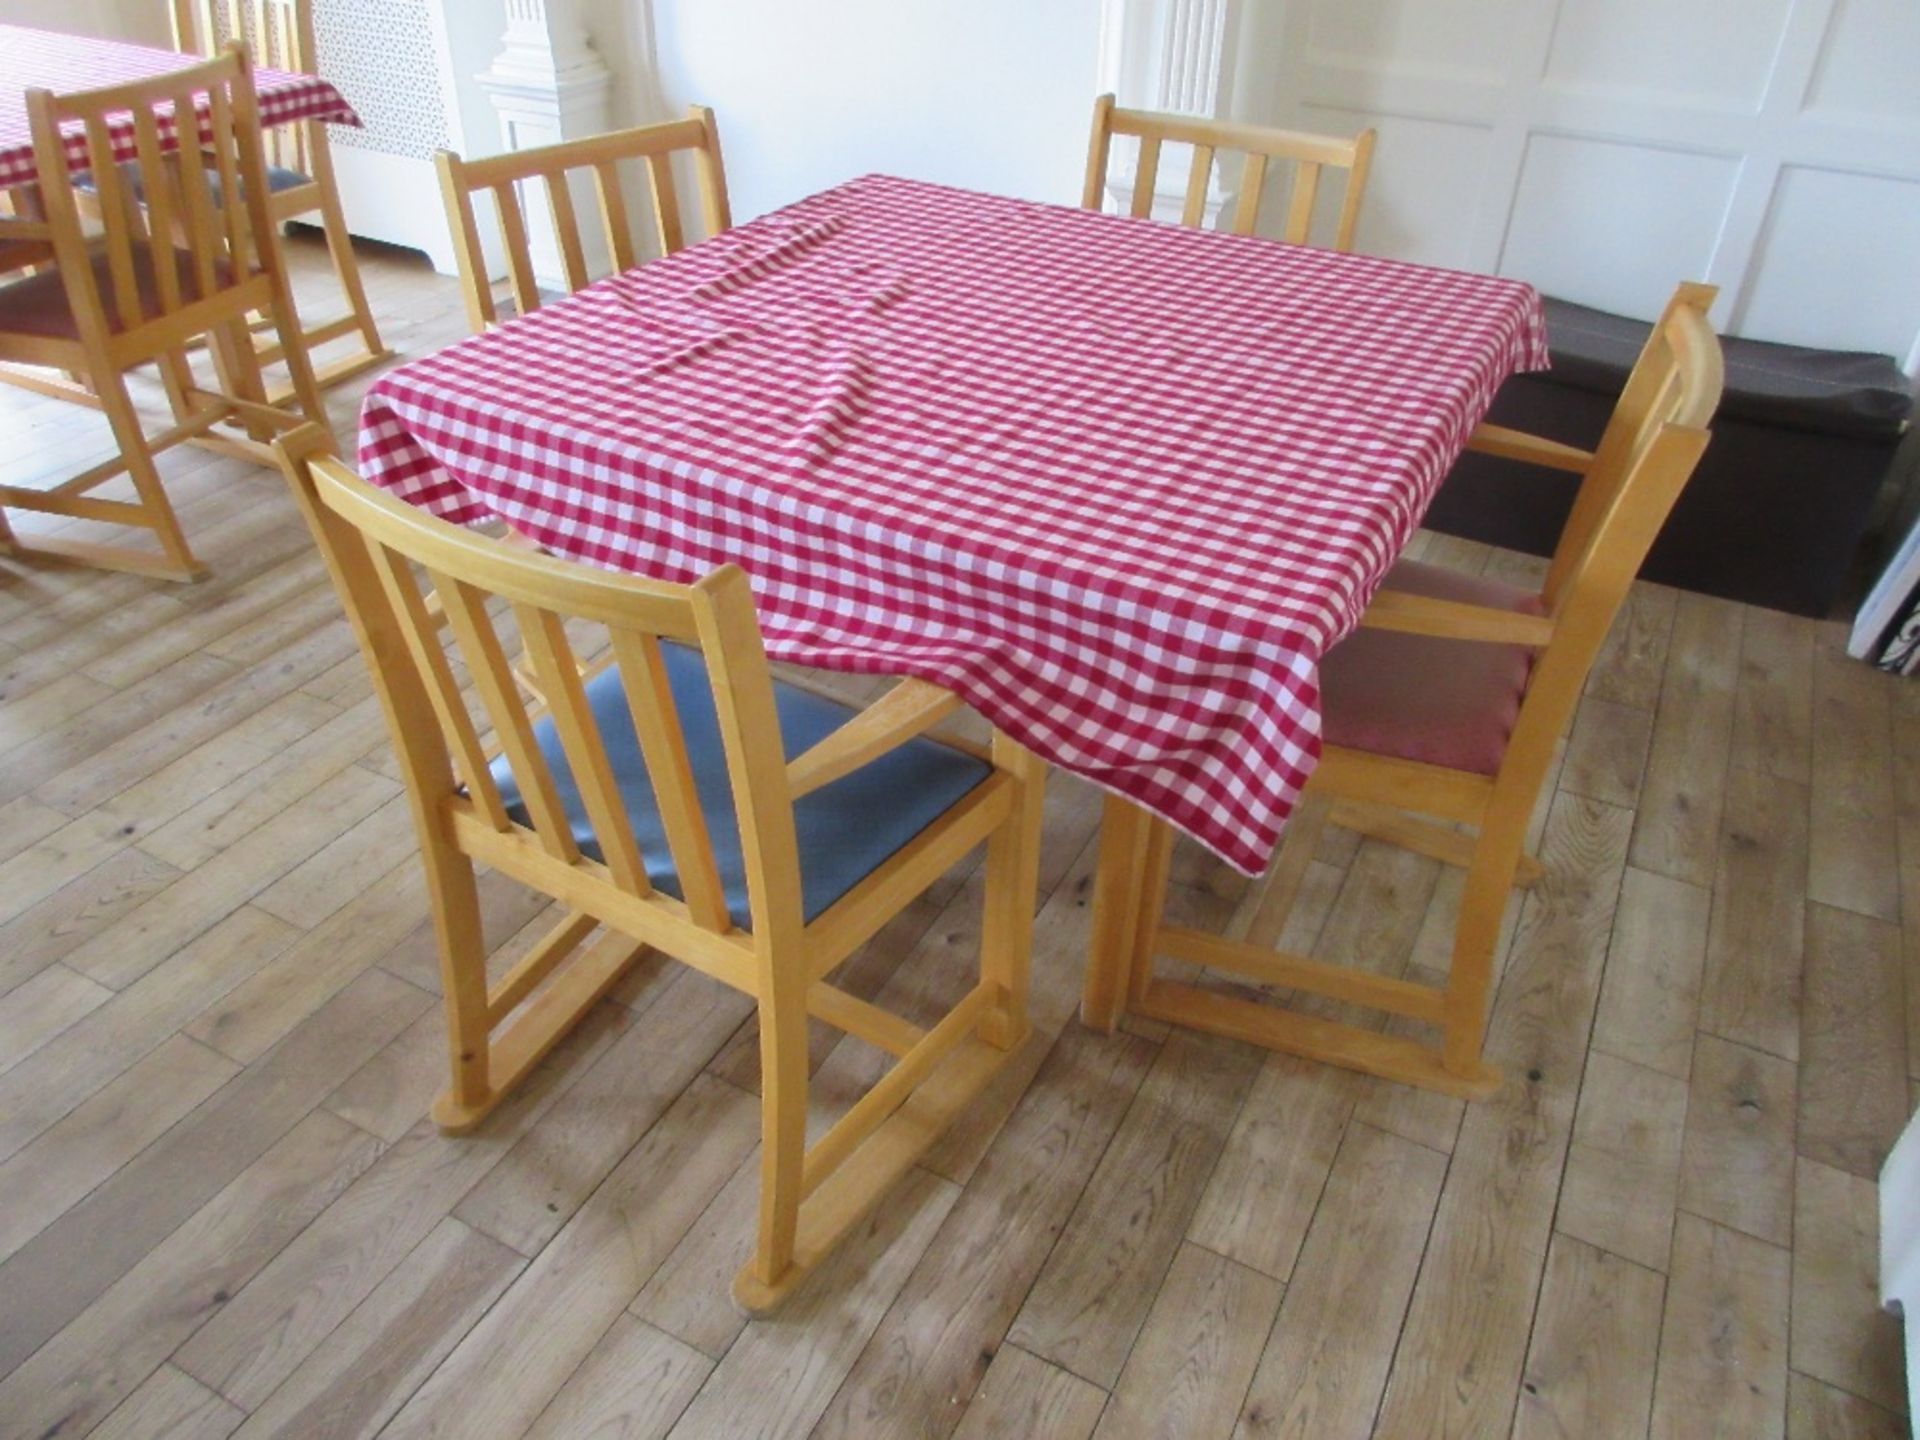 3 - Square wooden framed tables with 12 chairs